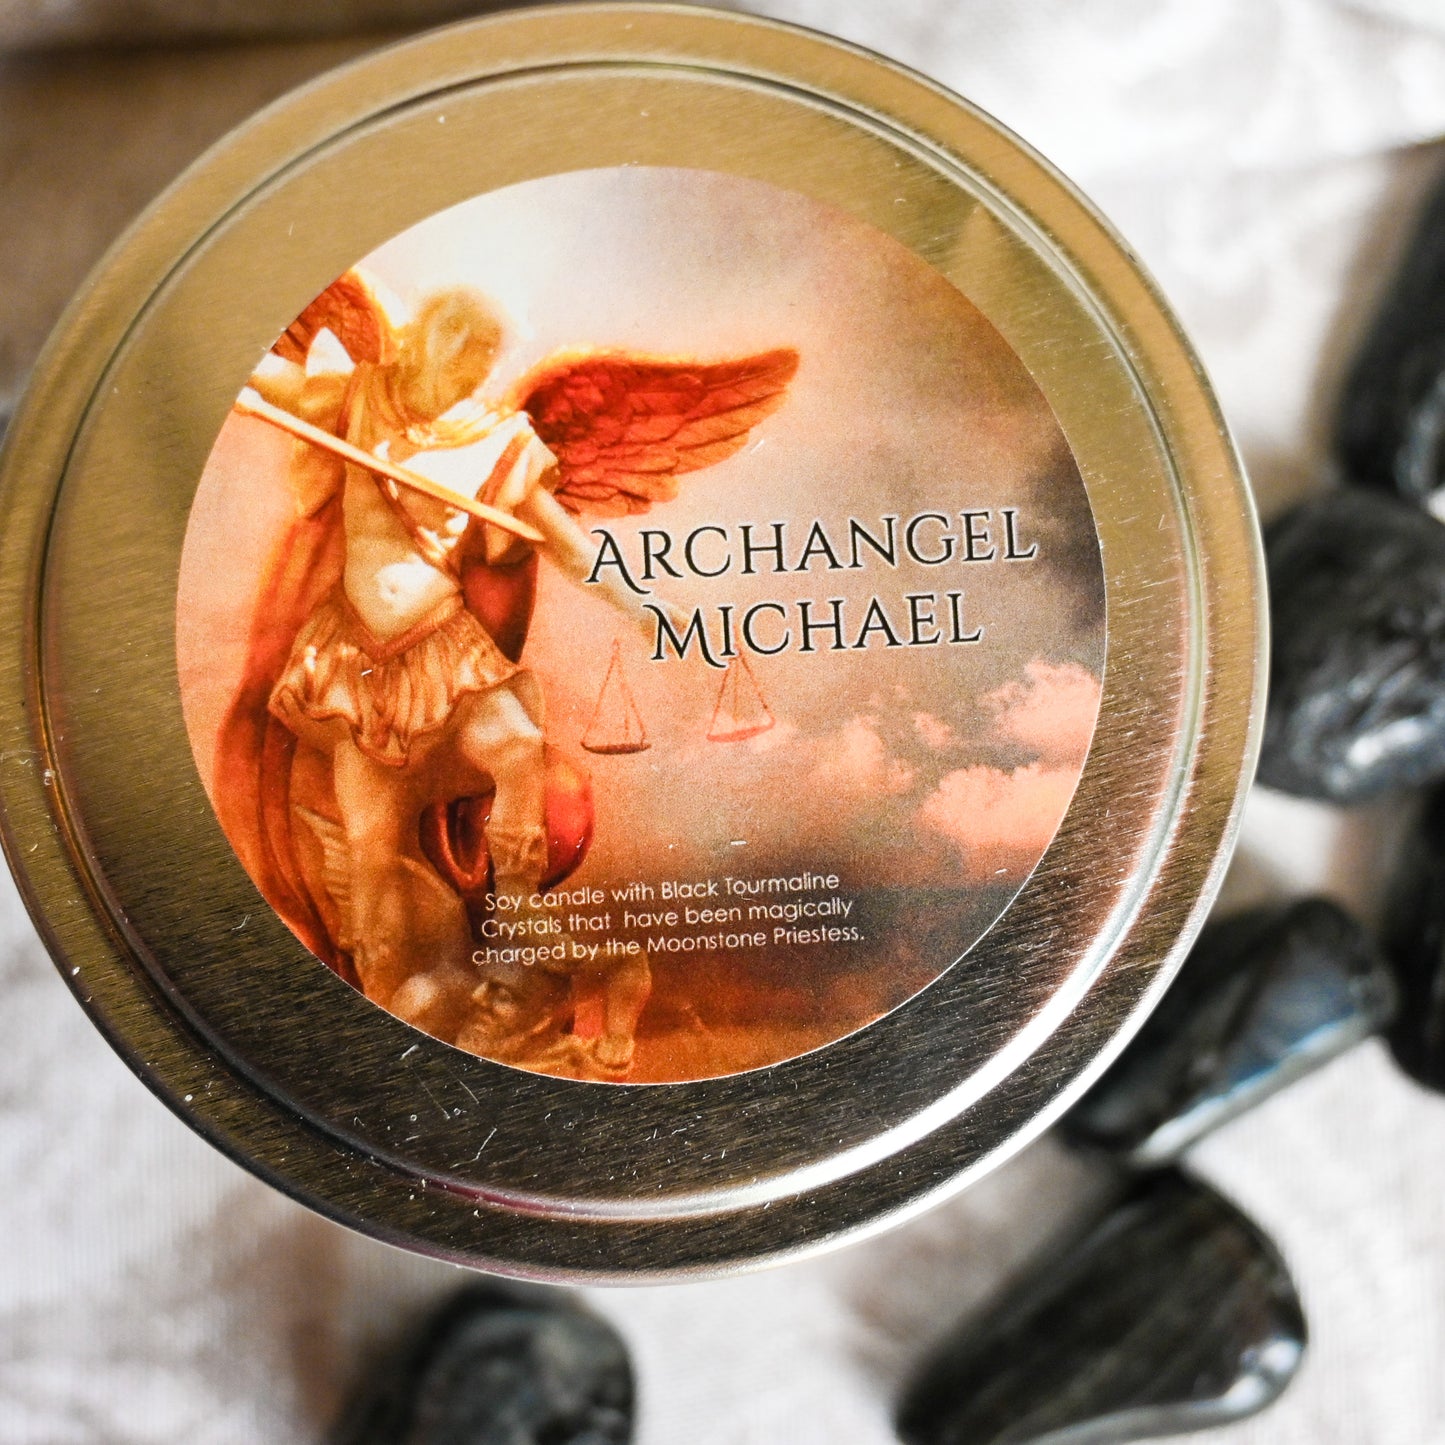 Archangel Michael Candle with Black Tourmaline Travel Tin